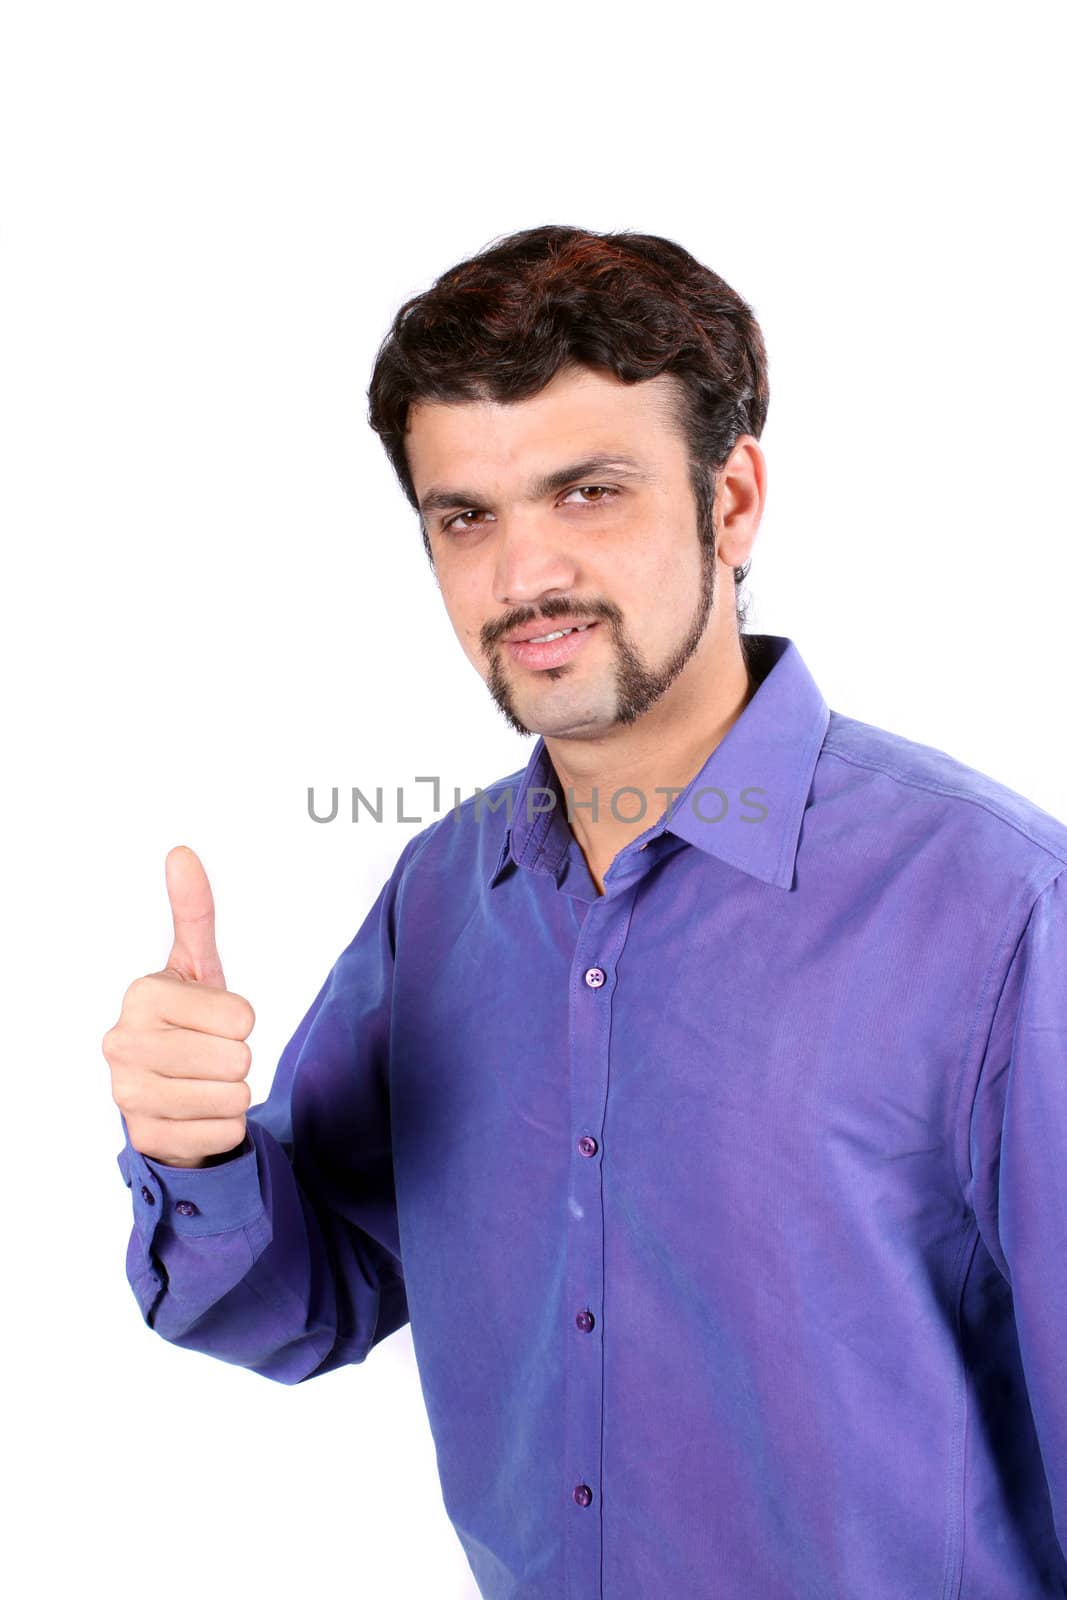 A young Indian guy wishing the best with a thumbs up sign, on white studio background.